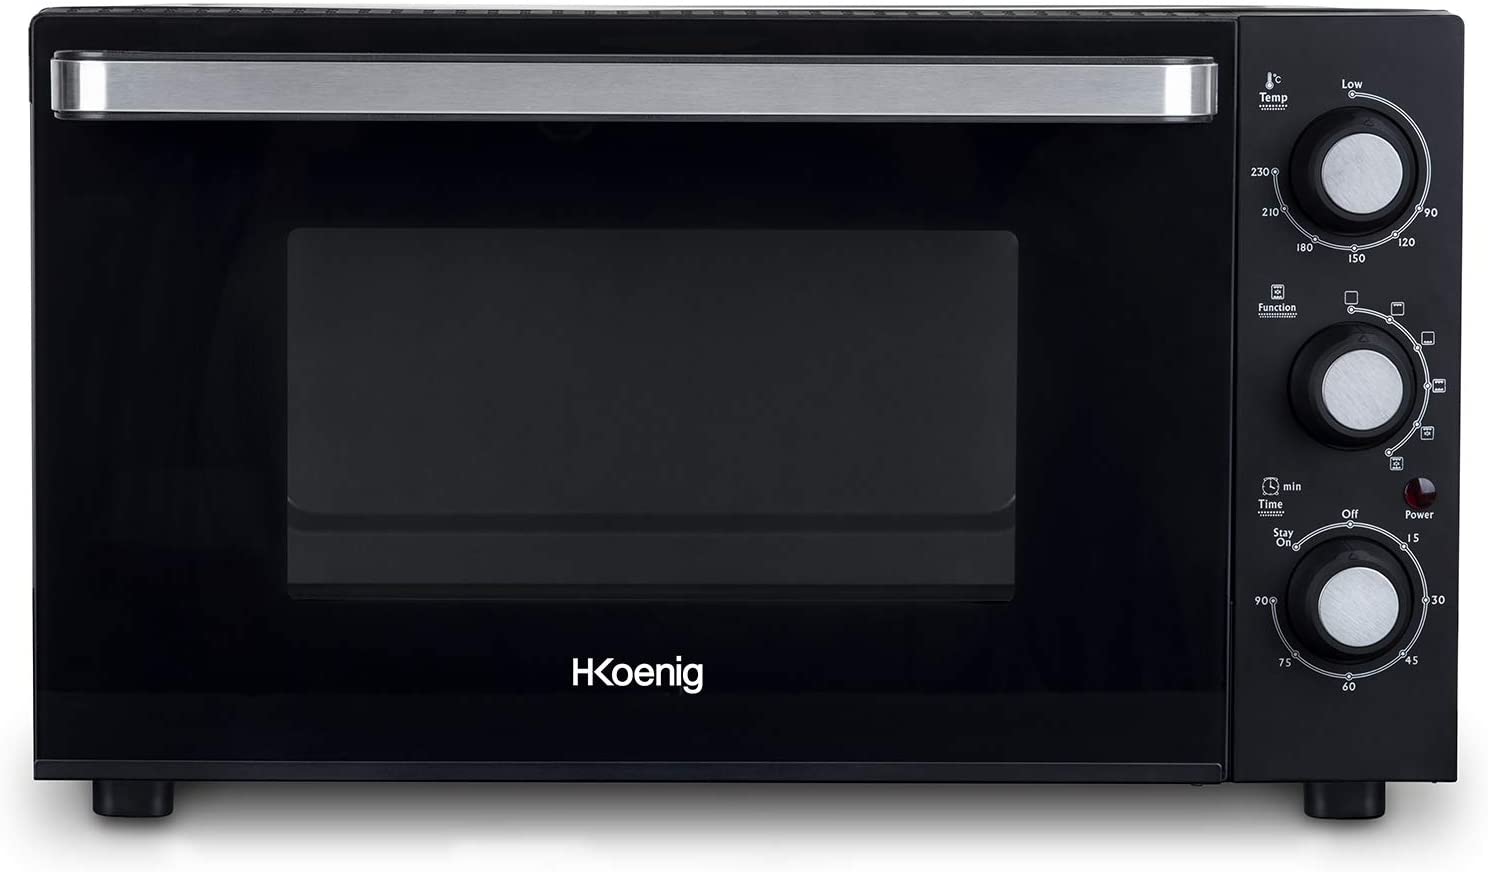 H.Koenig 30L Electric FO30 Compact Multifunction Mini Oven Powerful 1500W Programmable 6 Cooking Modes 230°C Timer 60min Glass Door Double Glazing Non Stick